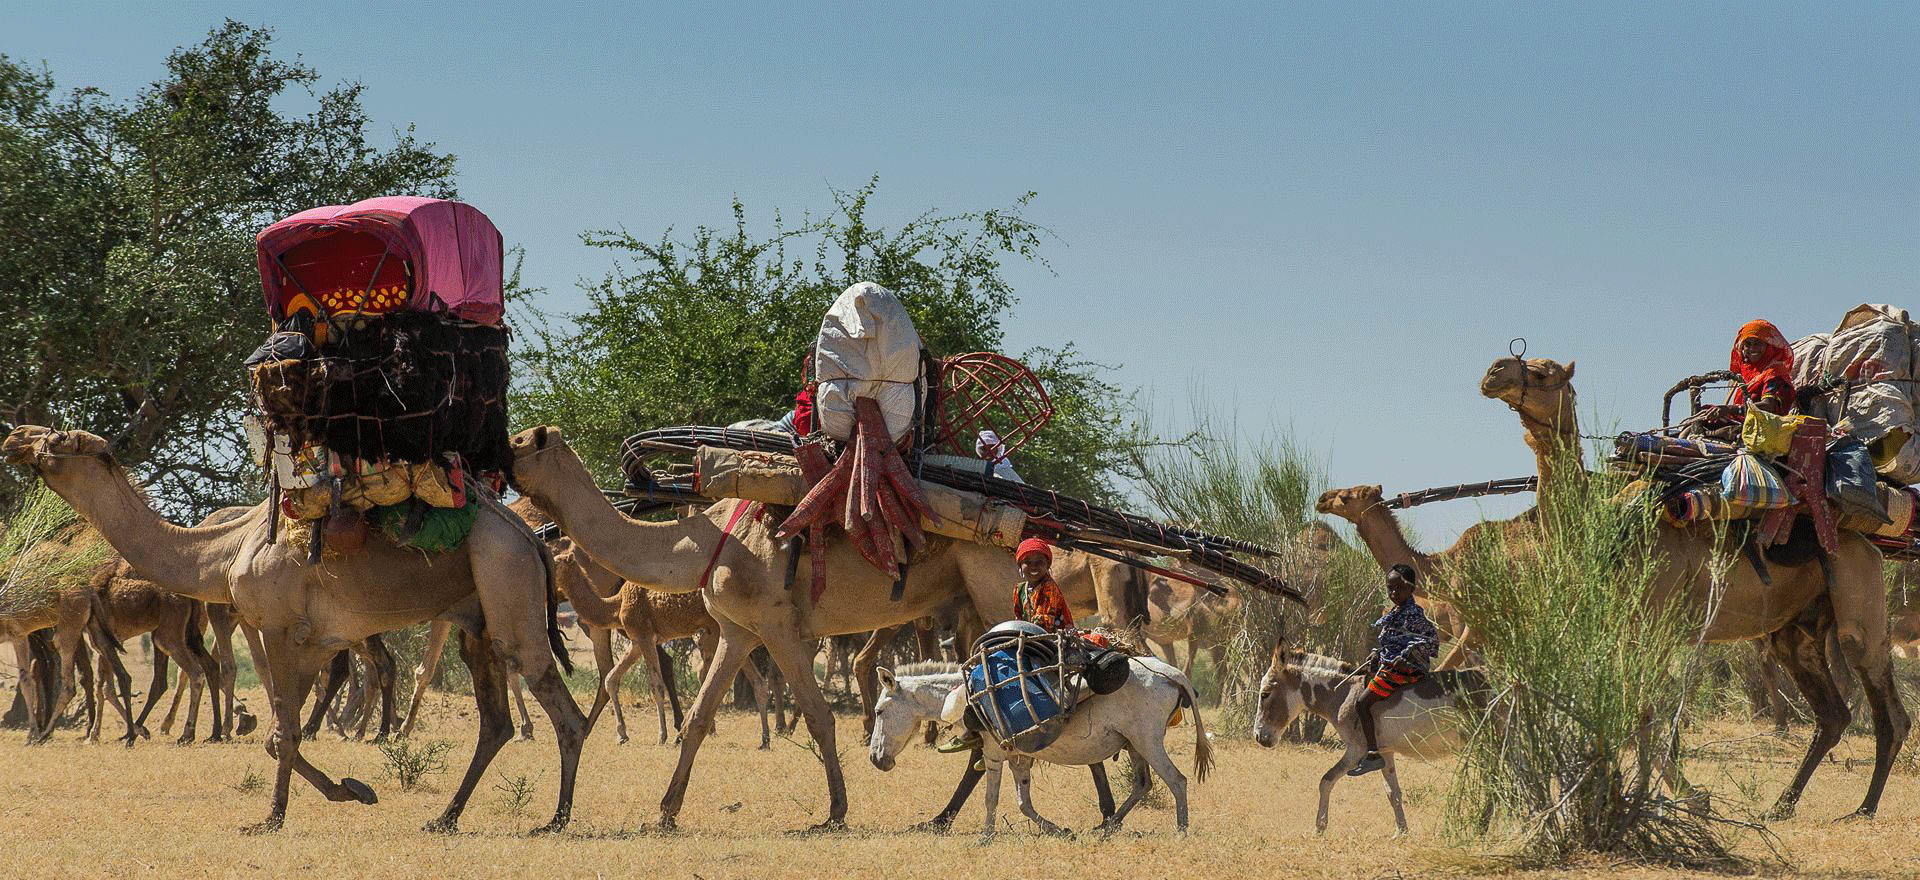 Nomads on the move in Mongo region - Chad tours